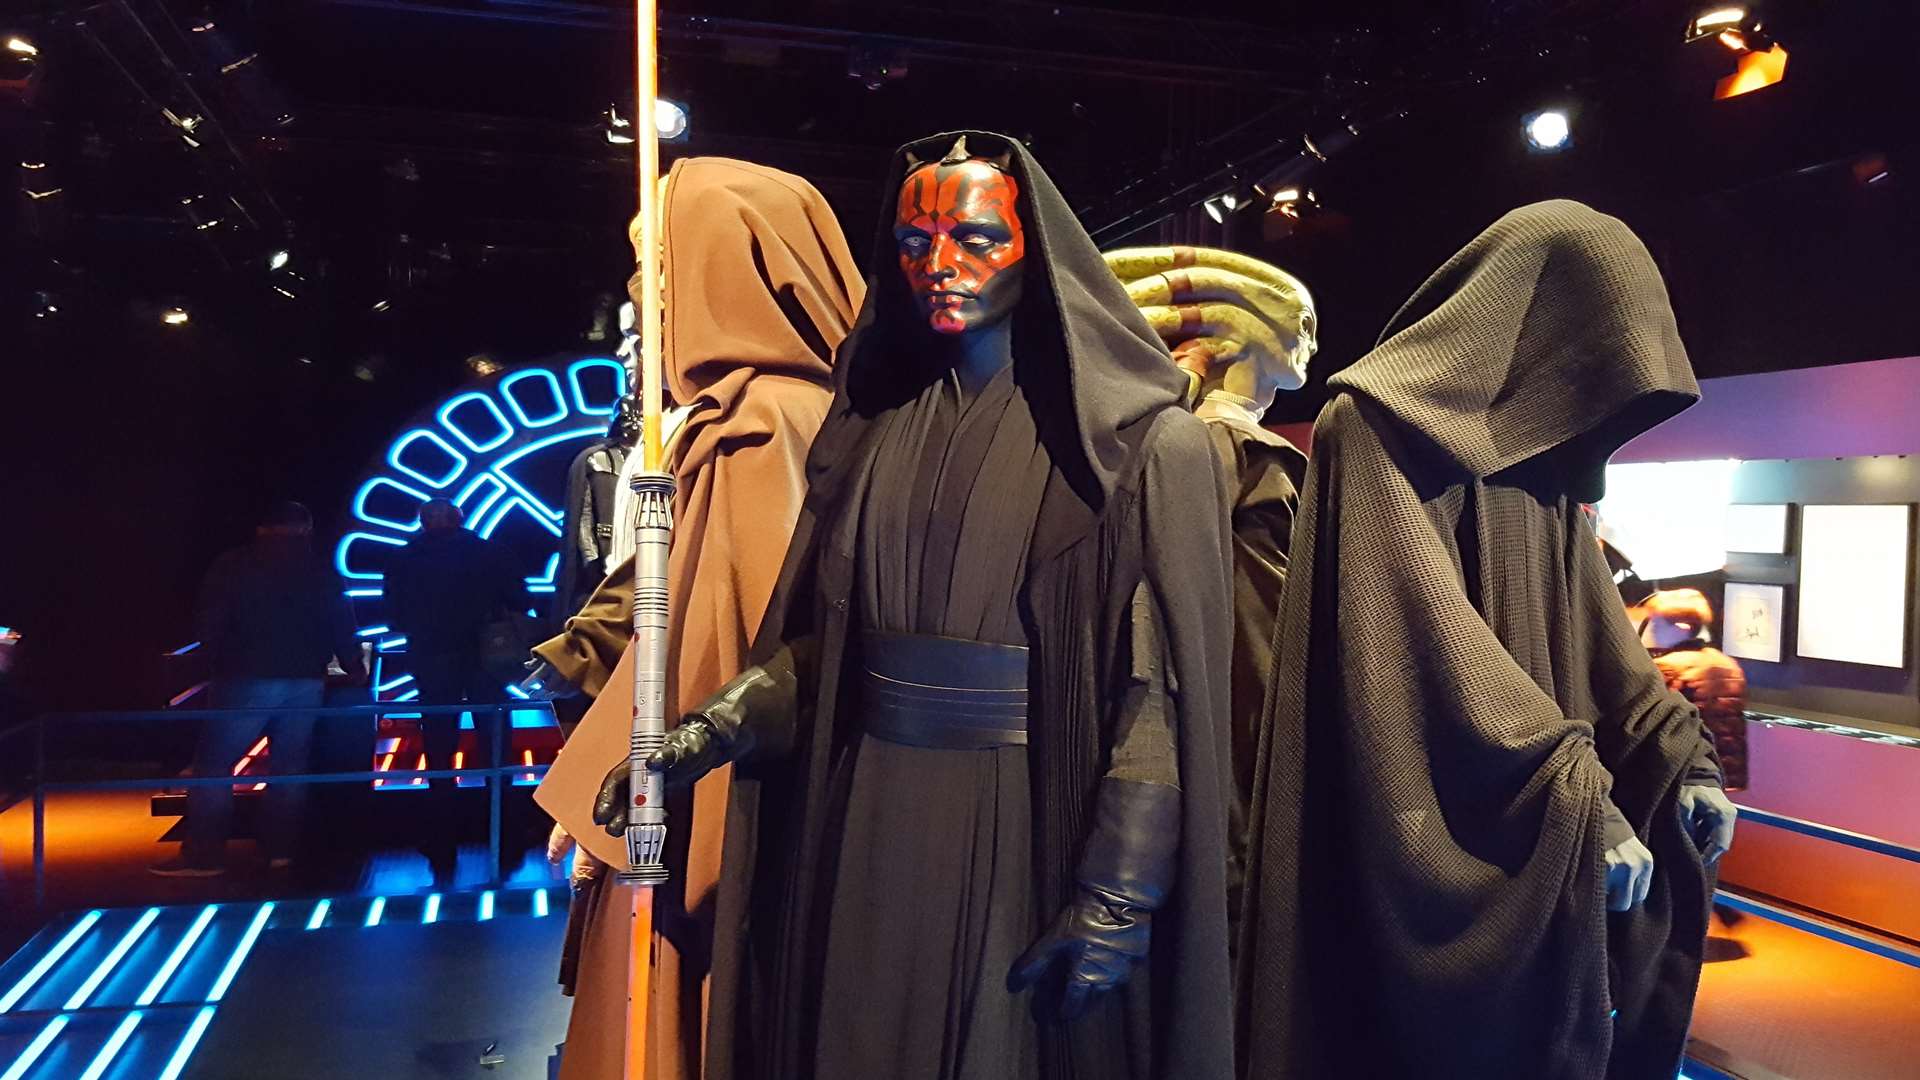 Ray Park's costume as Darth Maul at the Star Wars Identities exhibition